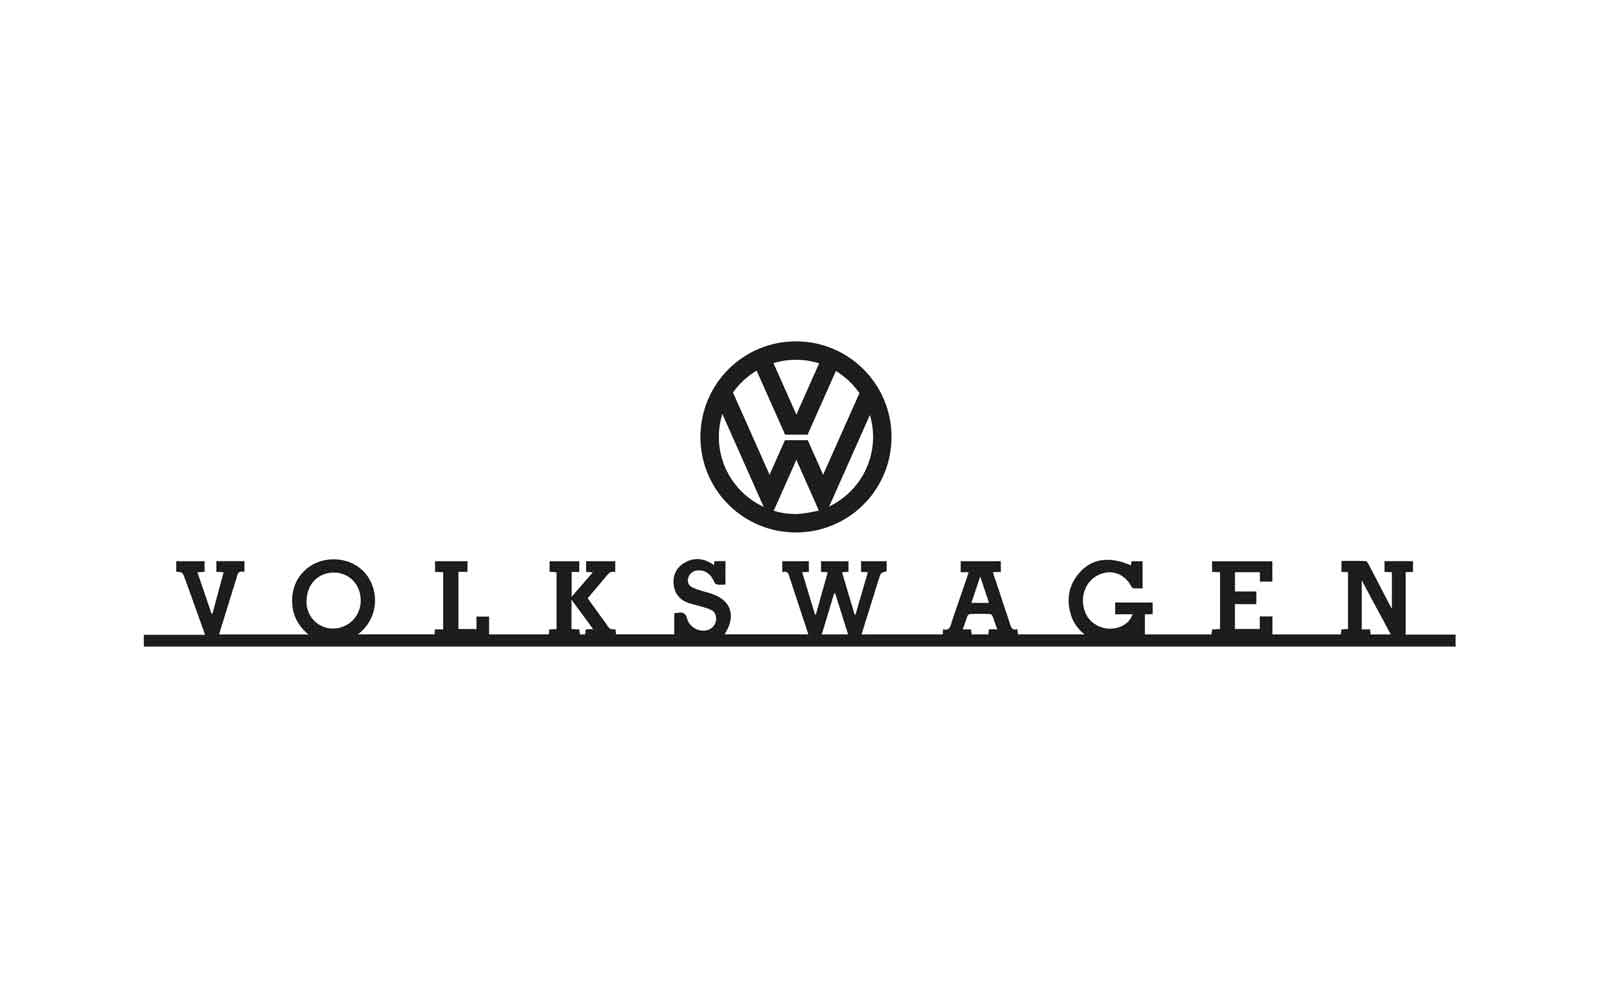 Rustic VW Logo - Volkswagen Archives Home and Gifts